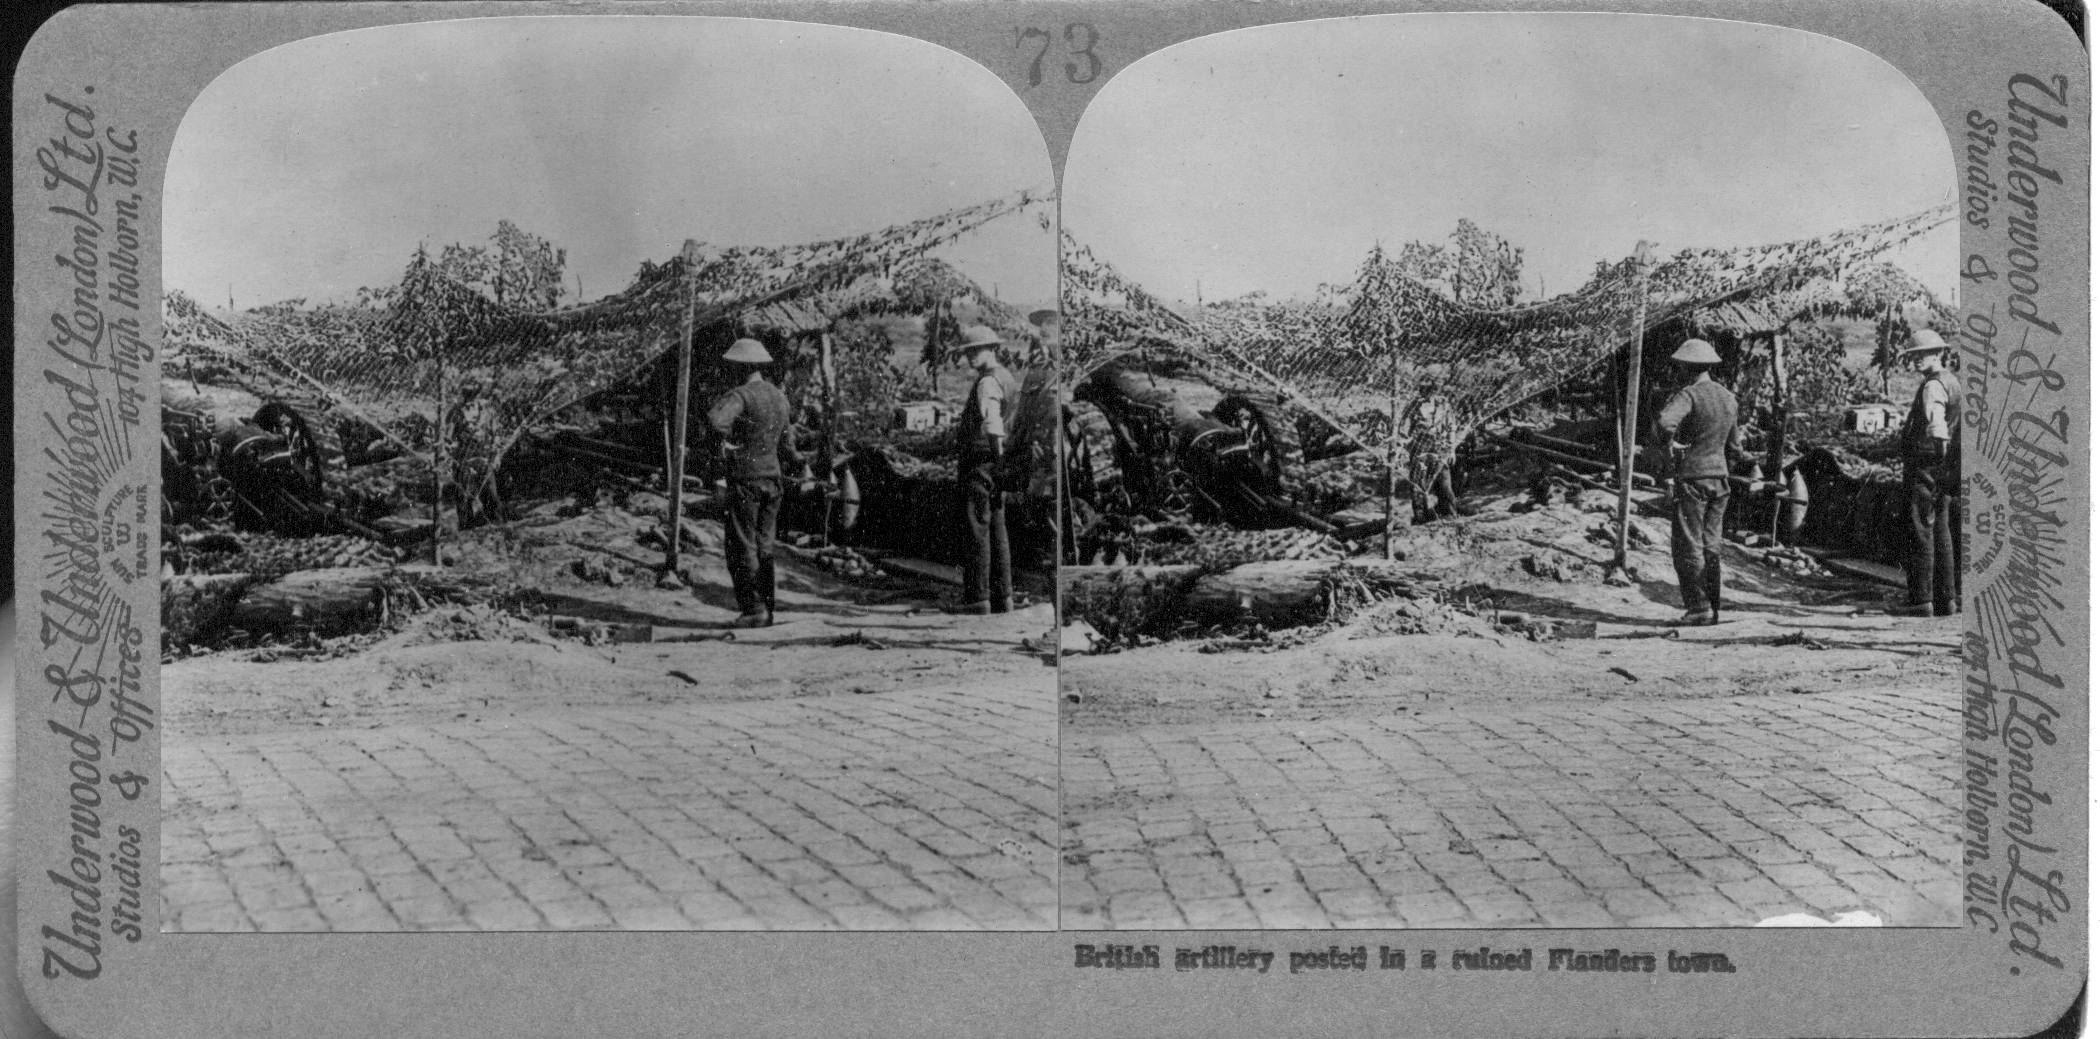 British artillery posted in a ruined Flanders town